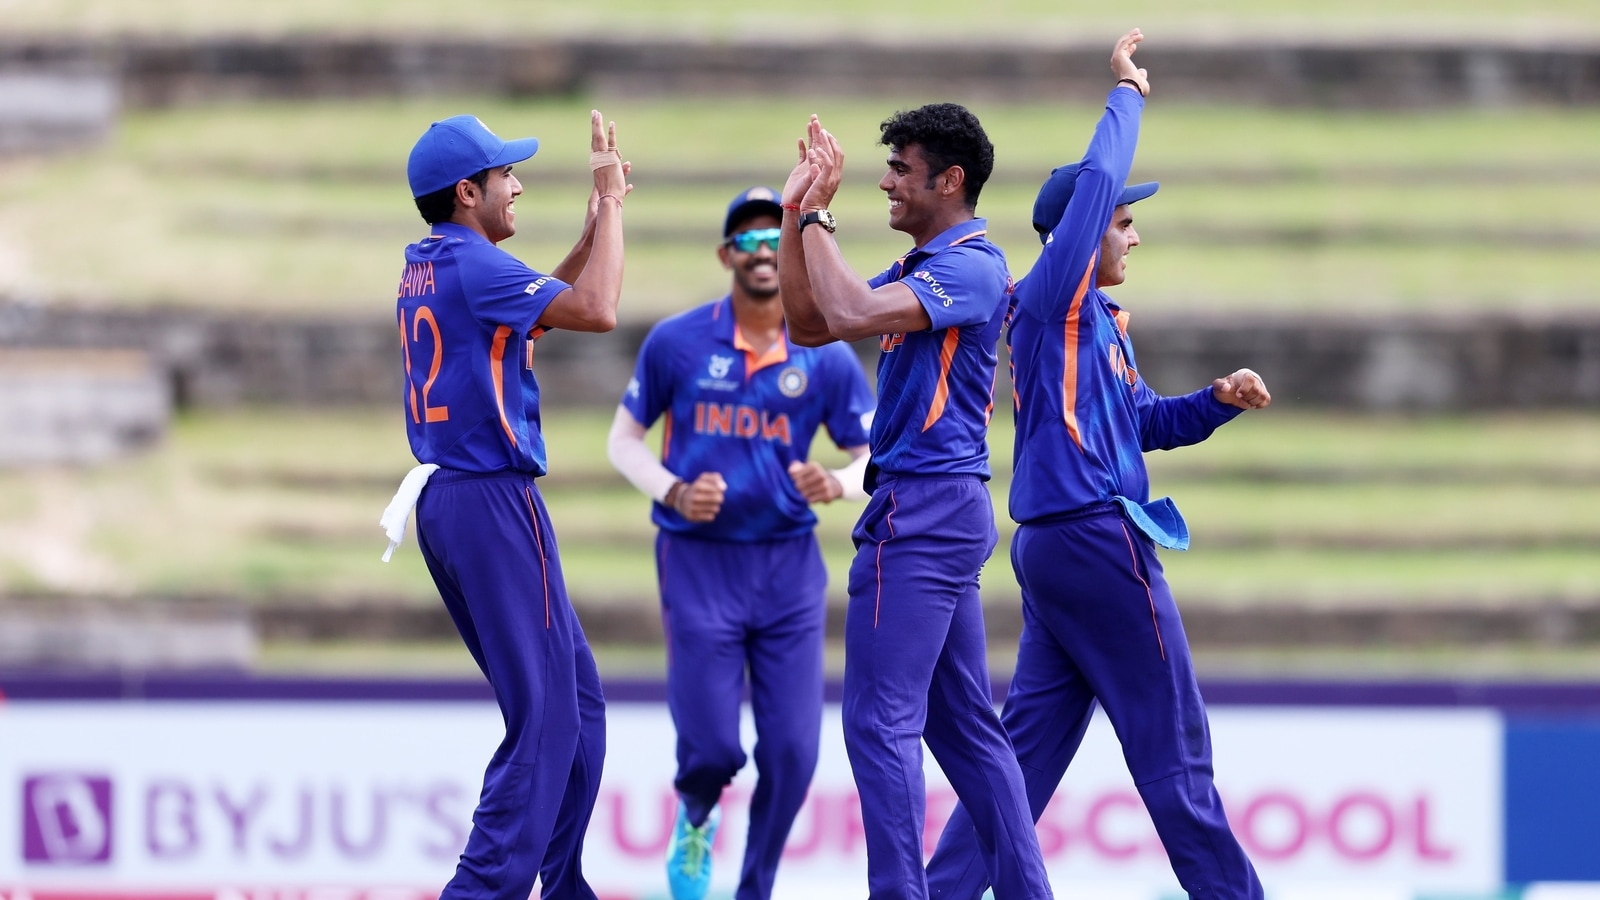 IND U19 vs UGA U19 Live Streaming, ICC World Cup When and Where to watch live Cricket